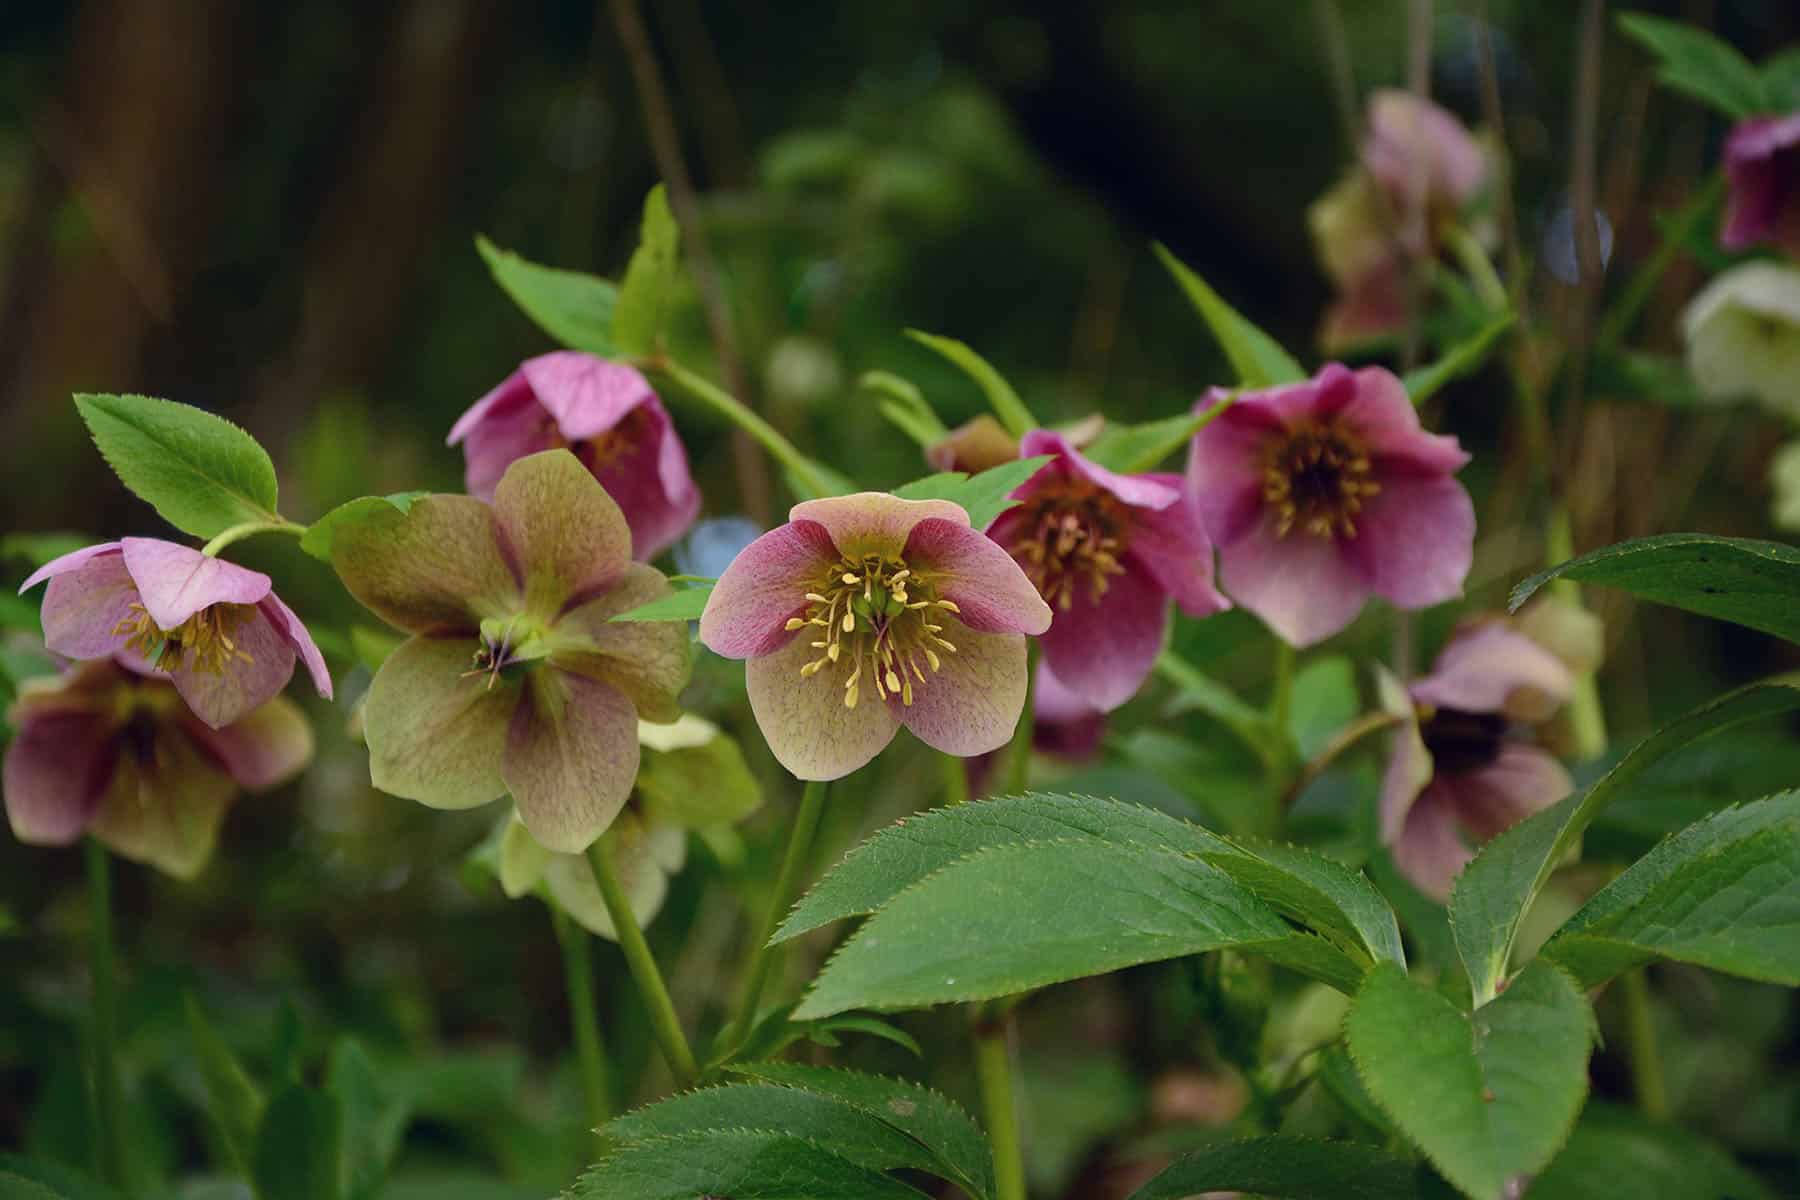 A close up of pink and green flowers and dark green foliage.